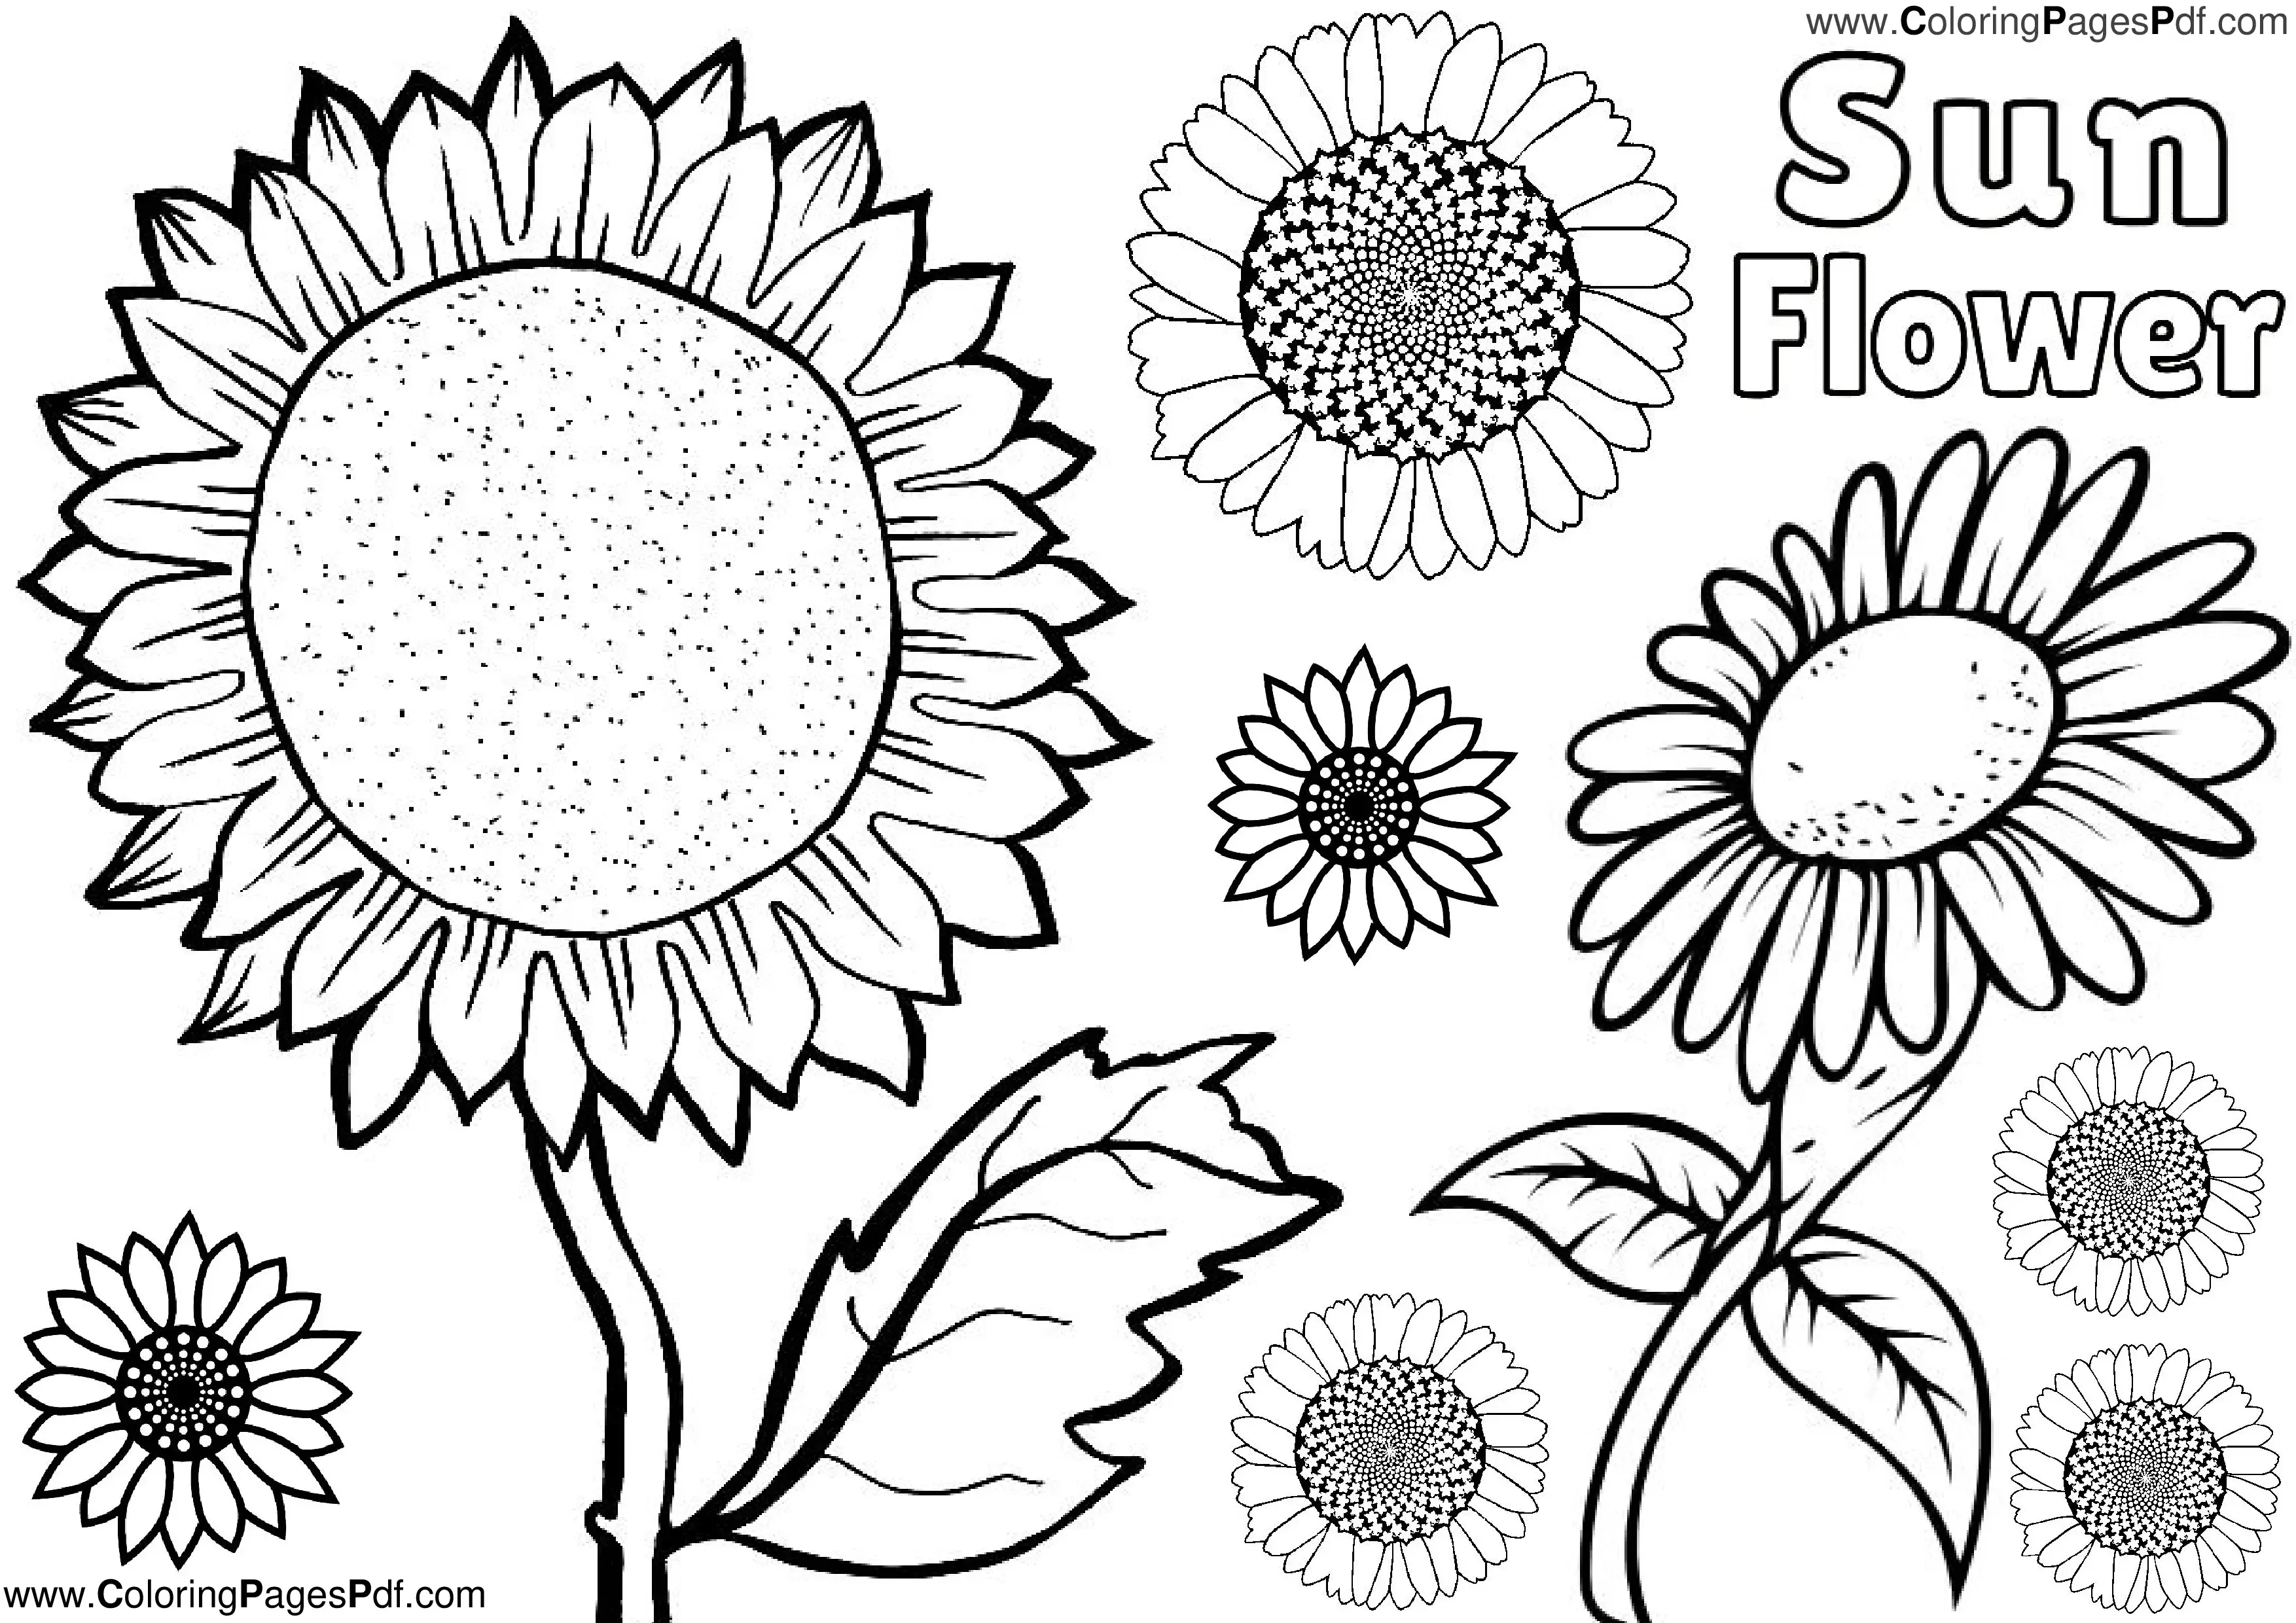 Sunflower coloring page PDF